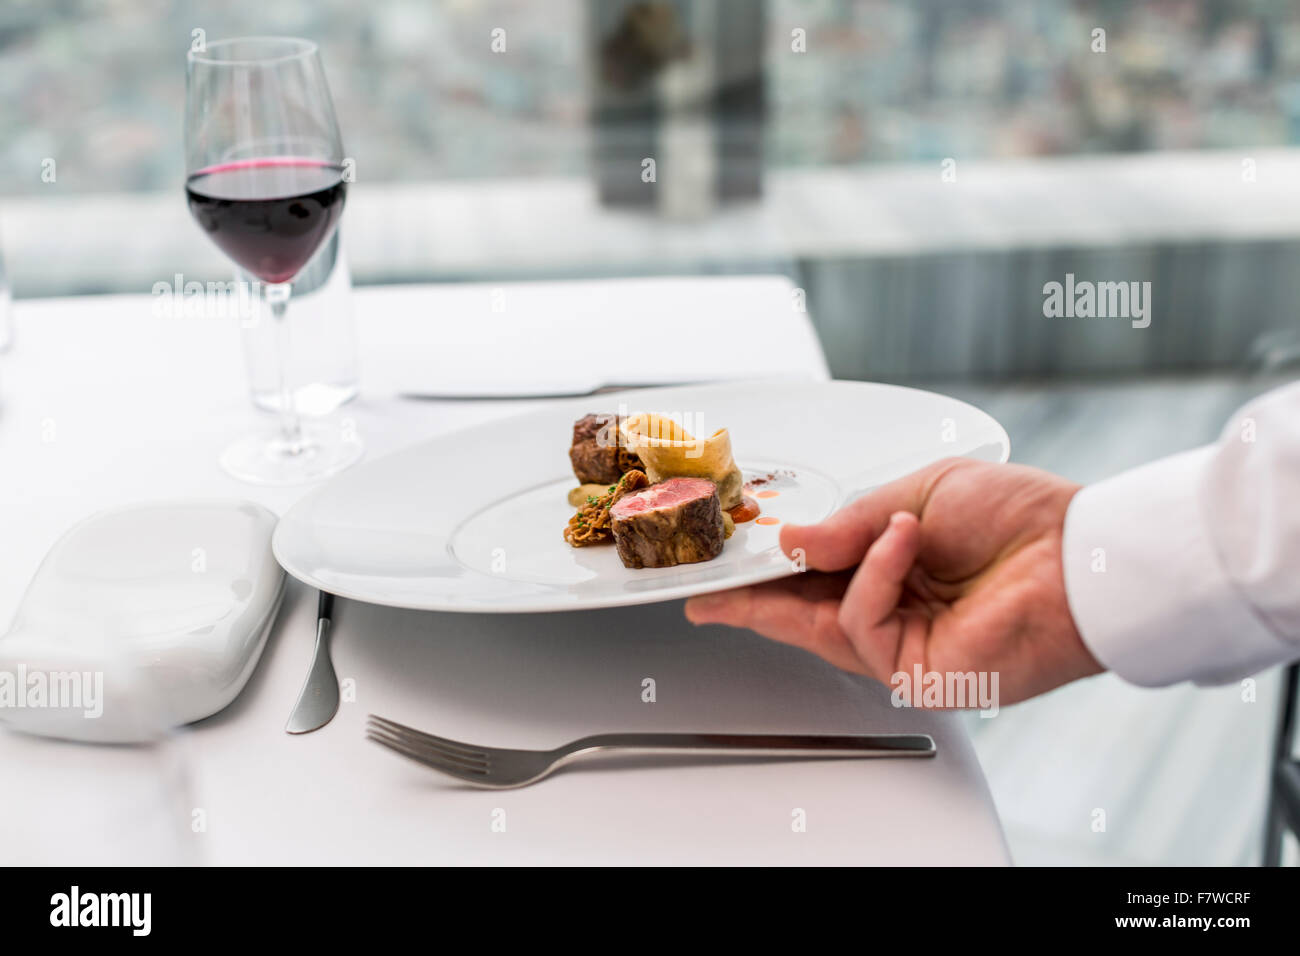 Food Served in A Restaurant Stock Photo